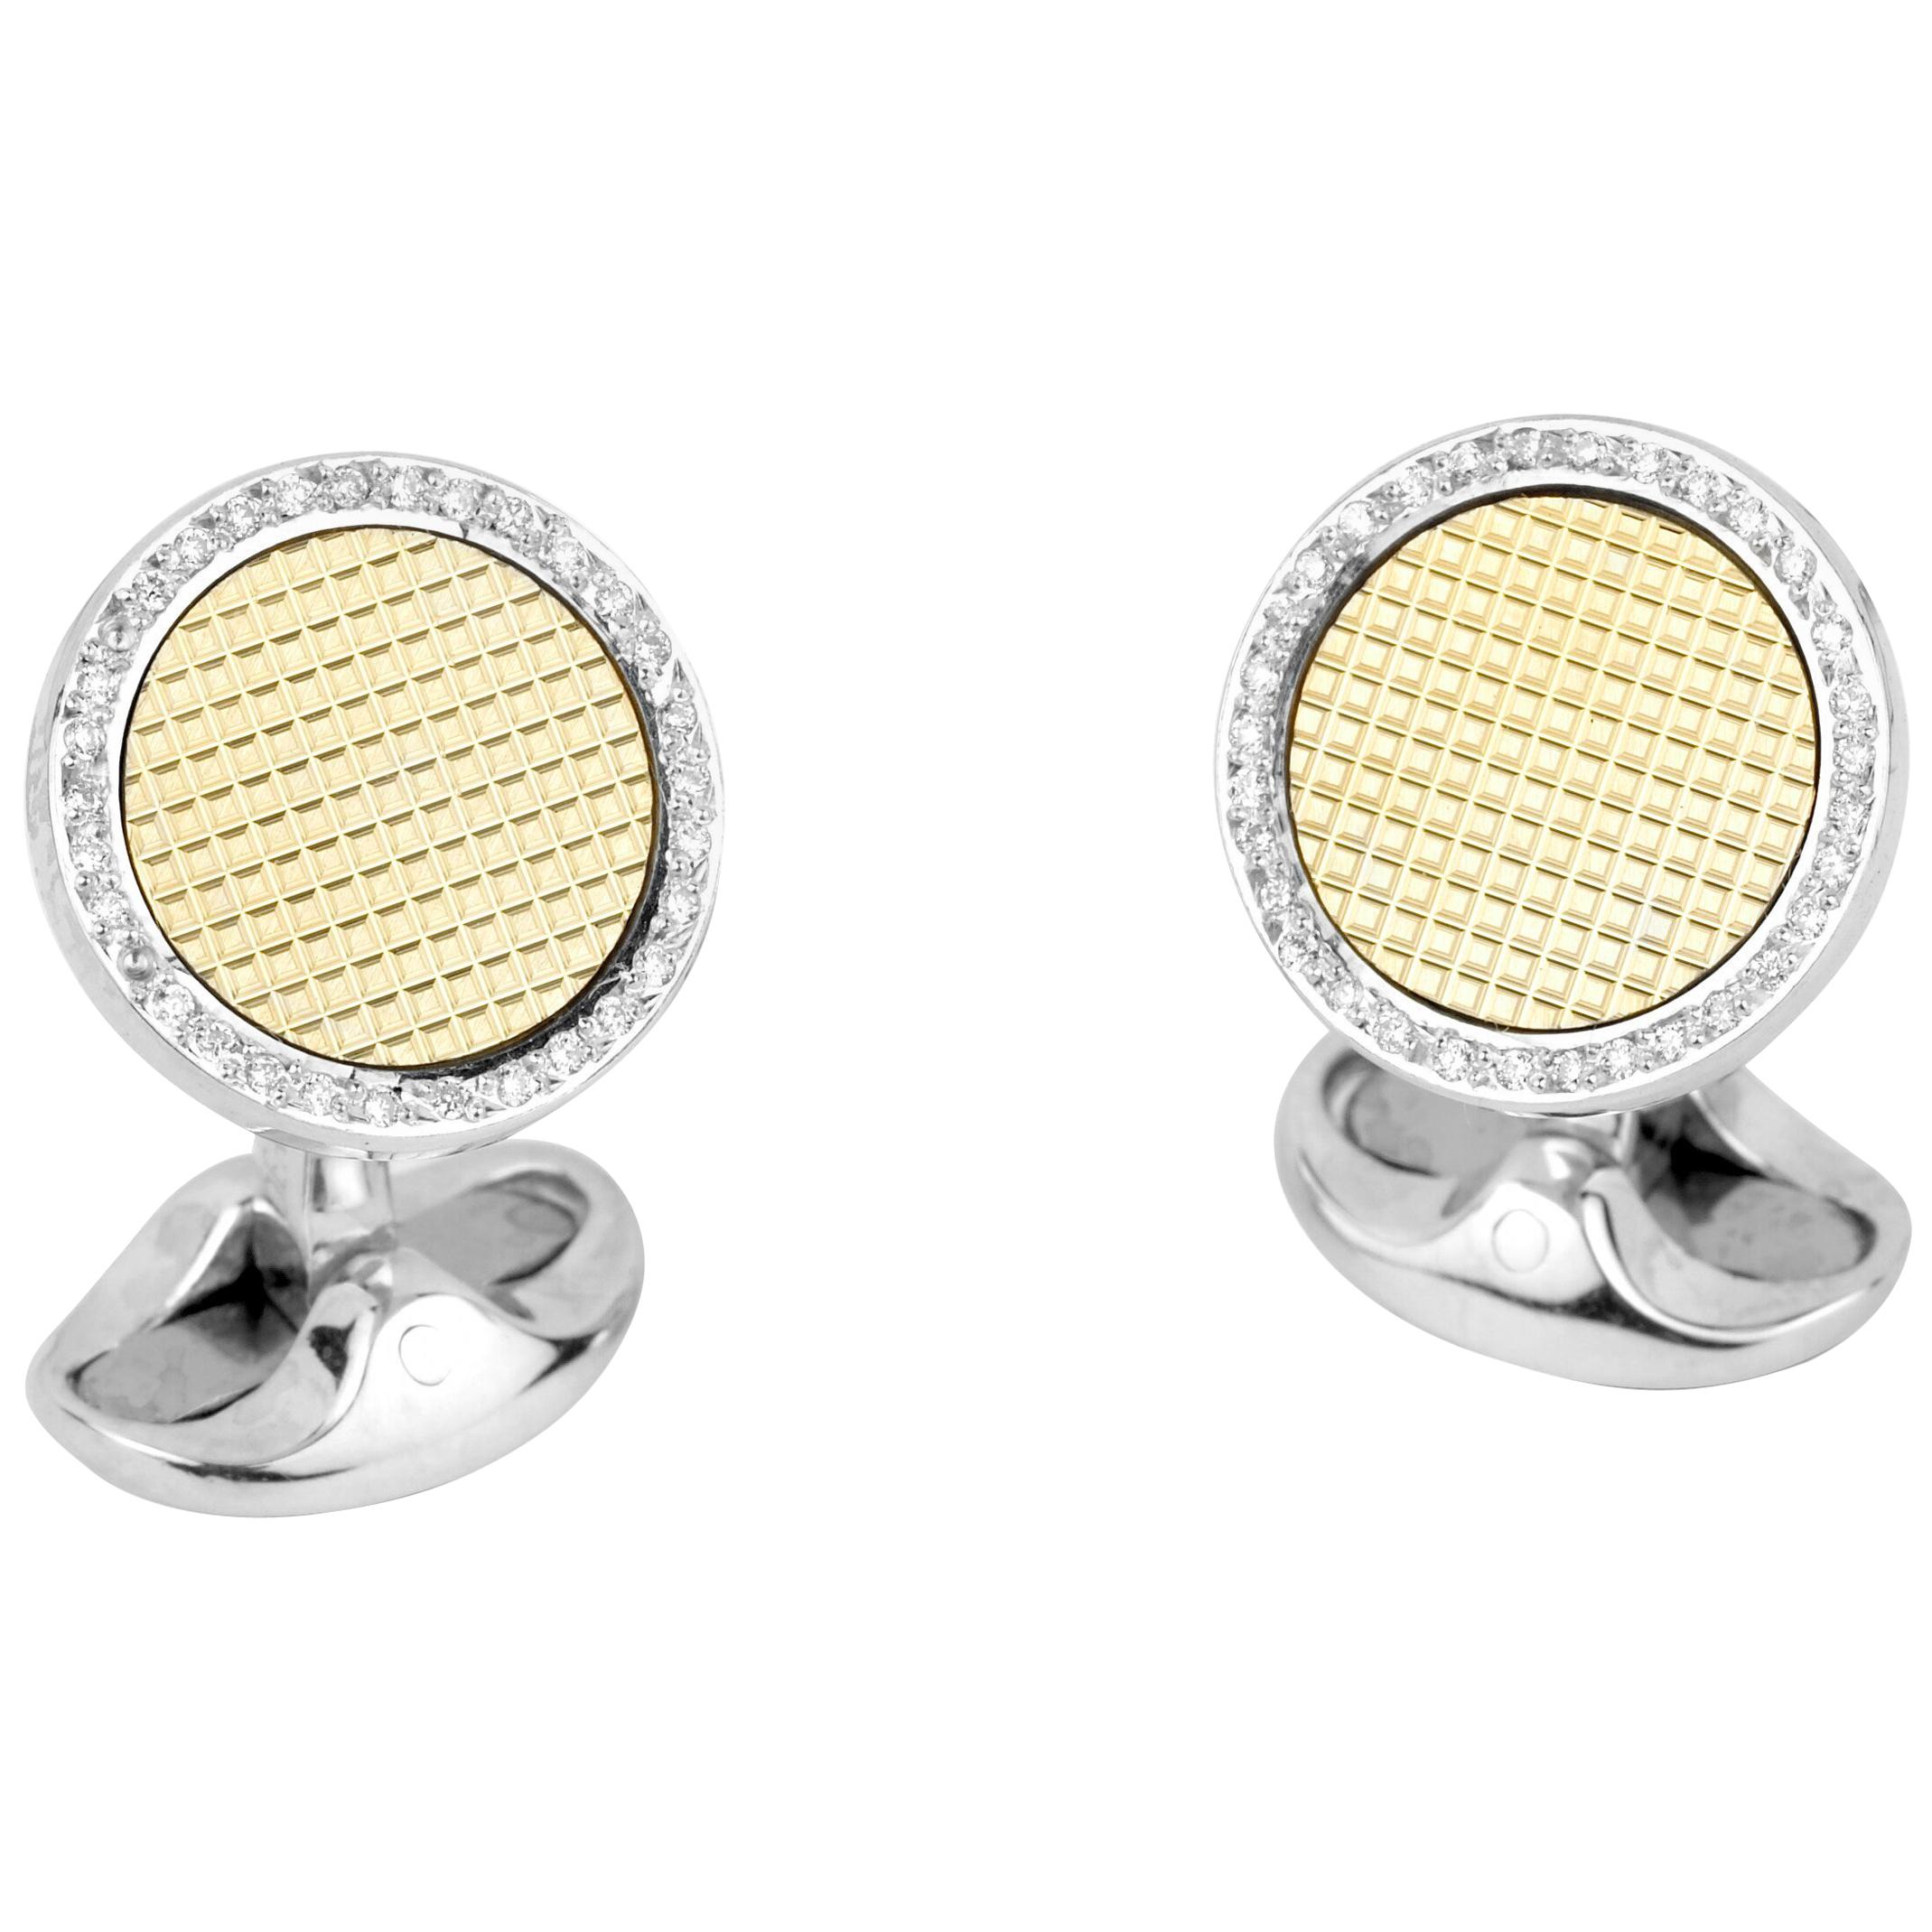 Deakin & Francis Sterling Silver and 18k Gold Cufflinks with Diamond Boarder